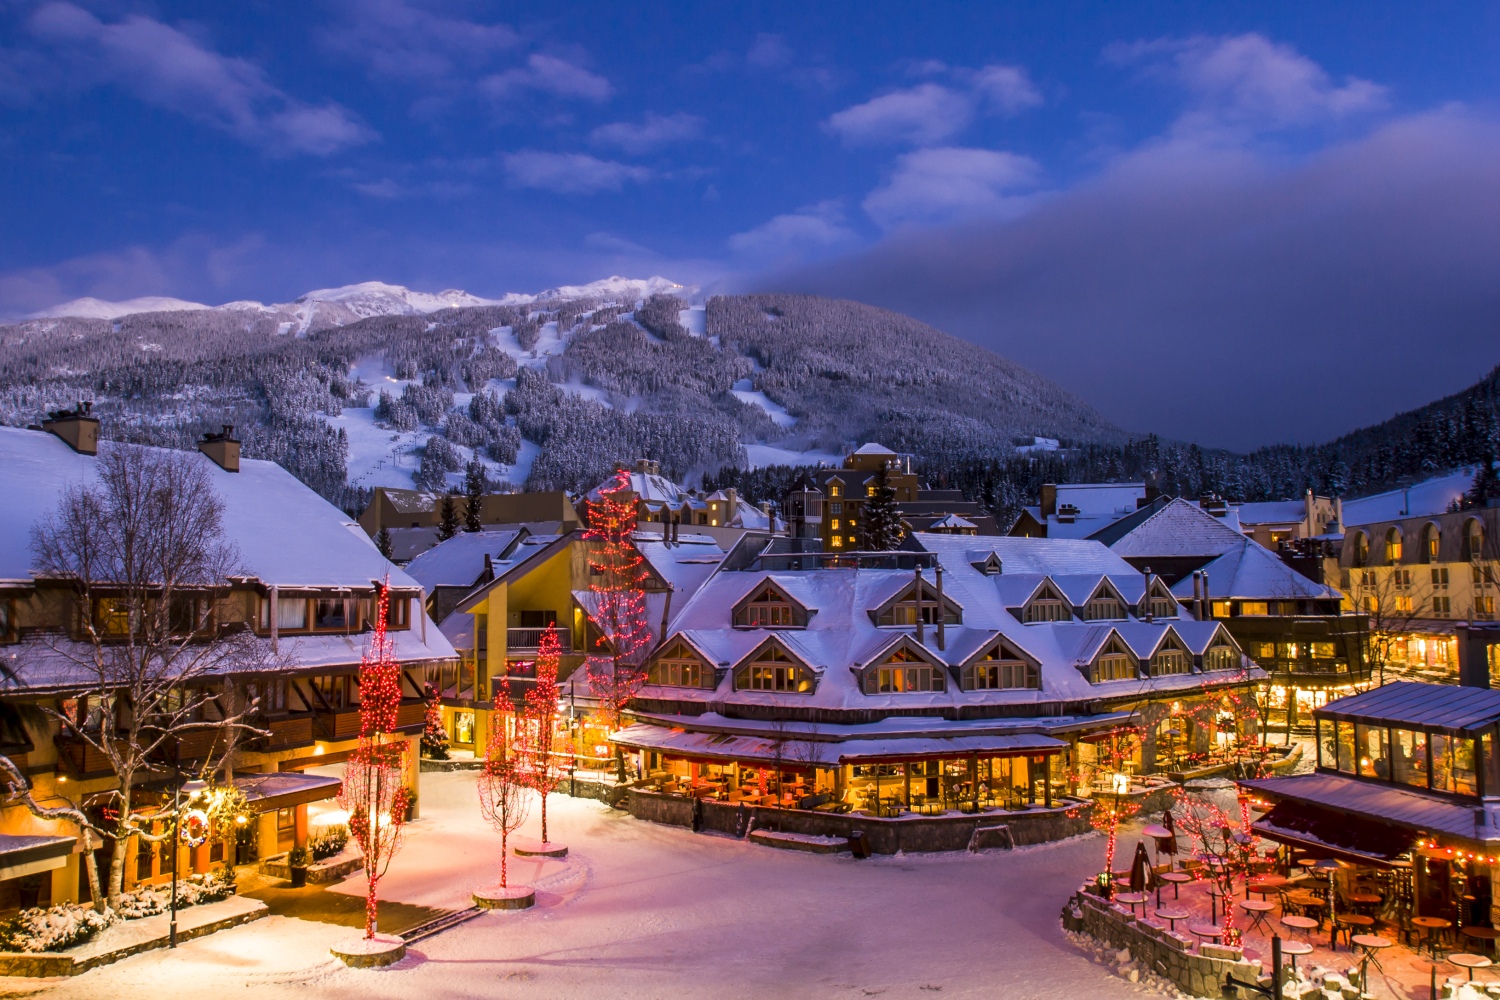 Canadian Ski Resorts The Best Places to Go Skiing in Canada Snow